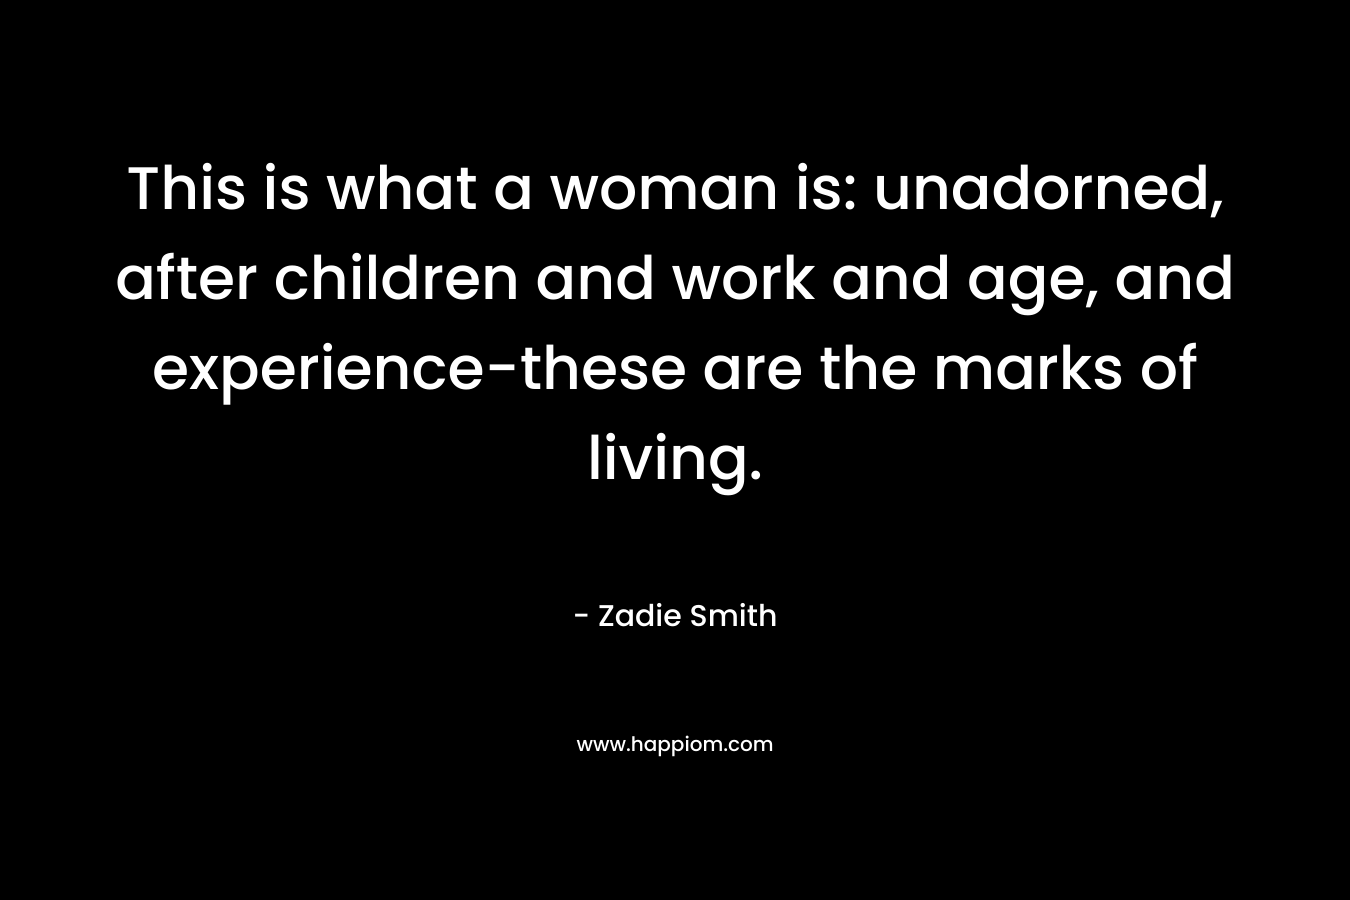 This is what a woman is: unadorned, after children and work and age, and experience-these are the marks of living.